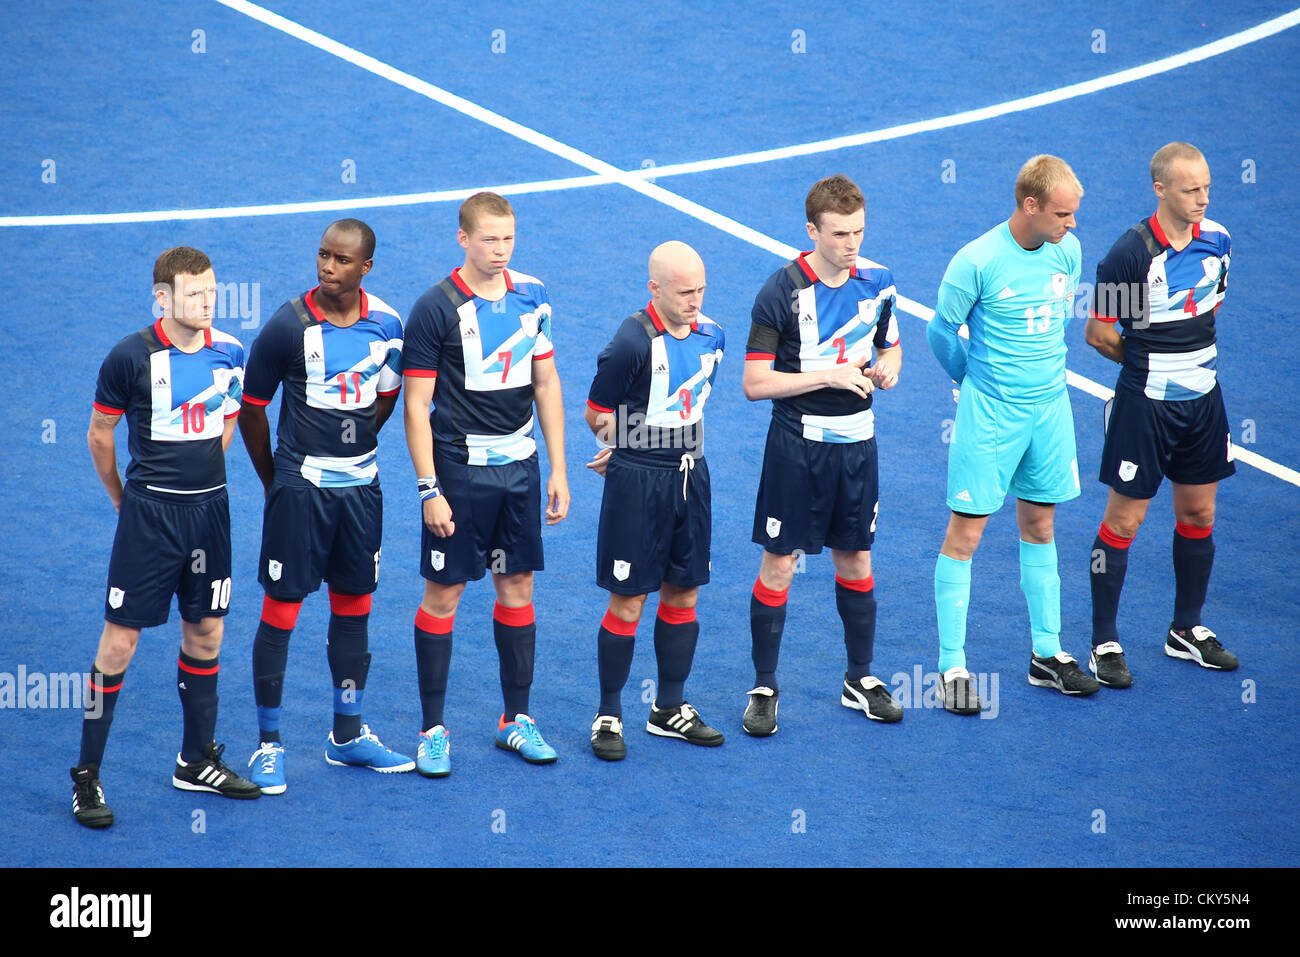 01.09.2012. London, England. Team GB line-up ahead of their Men's Football 7-a-side Preliminaries Pool B match against Brazil Stock Photo